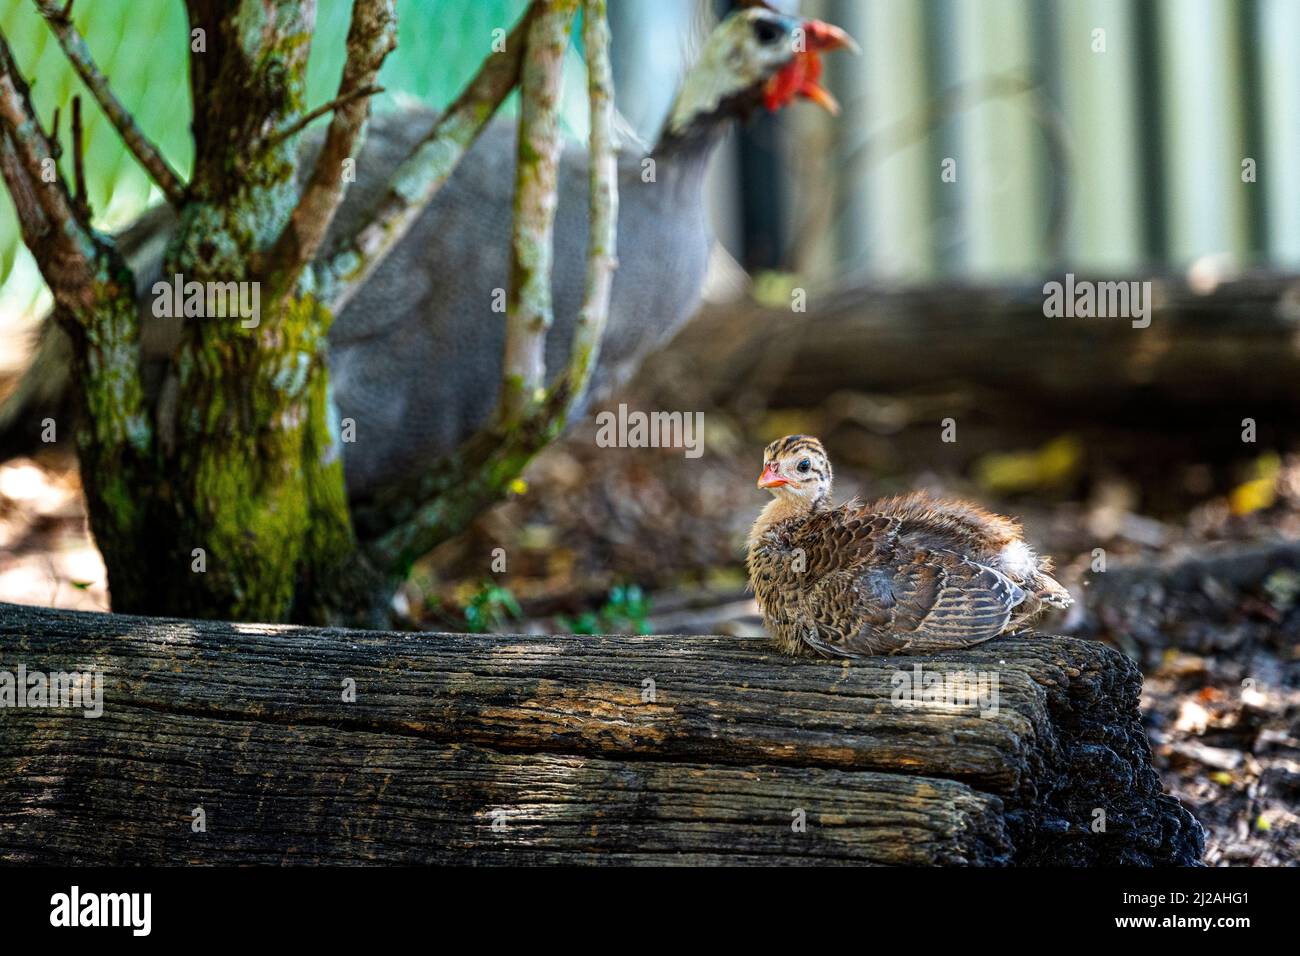 Helmeted Guinea Fowl (Numida meleagris) chick sitting on log with parent bird in background Stock Photo